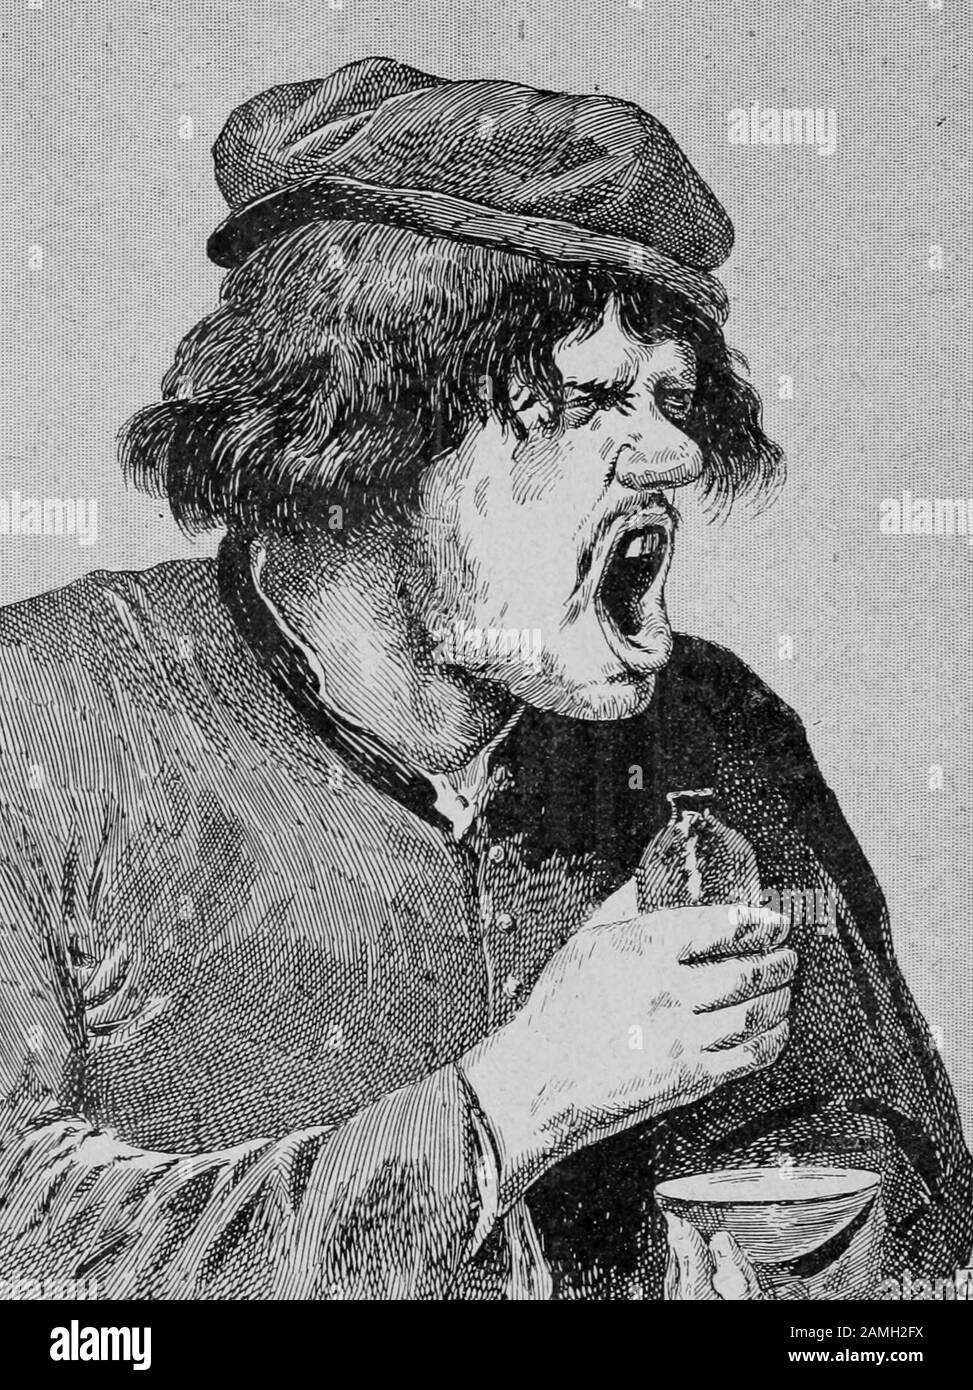 Image of a man grimacing after having tasted a bitter medicine, by painter Adriaen Brouwer, taken from the book 'Curiosites Medico-Artistiques' by author Lucien Nass, published by La Librairie Mondiale, 1907. Courtesy Internet Archive. () Stock Photo